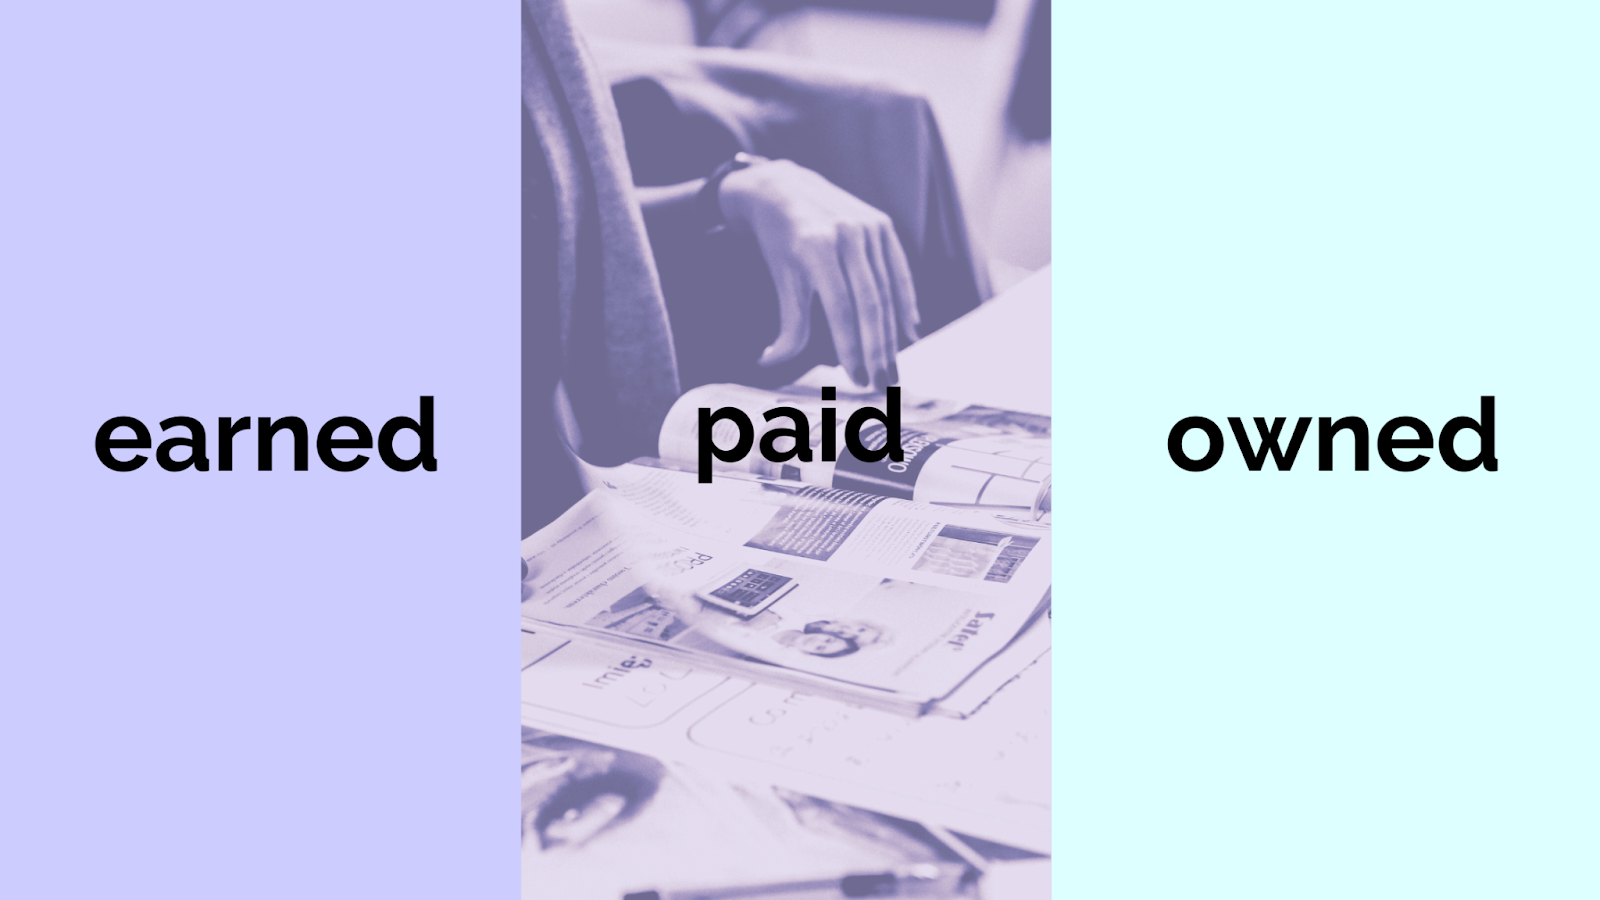 3 types of media: earned, paid, owned